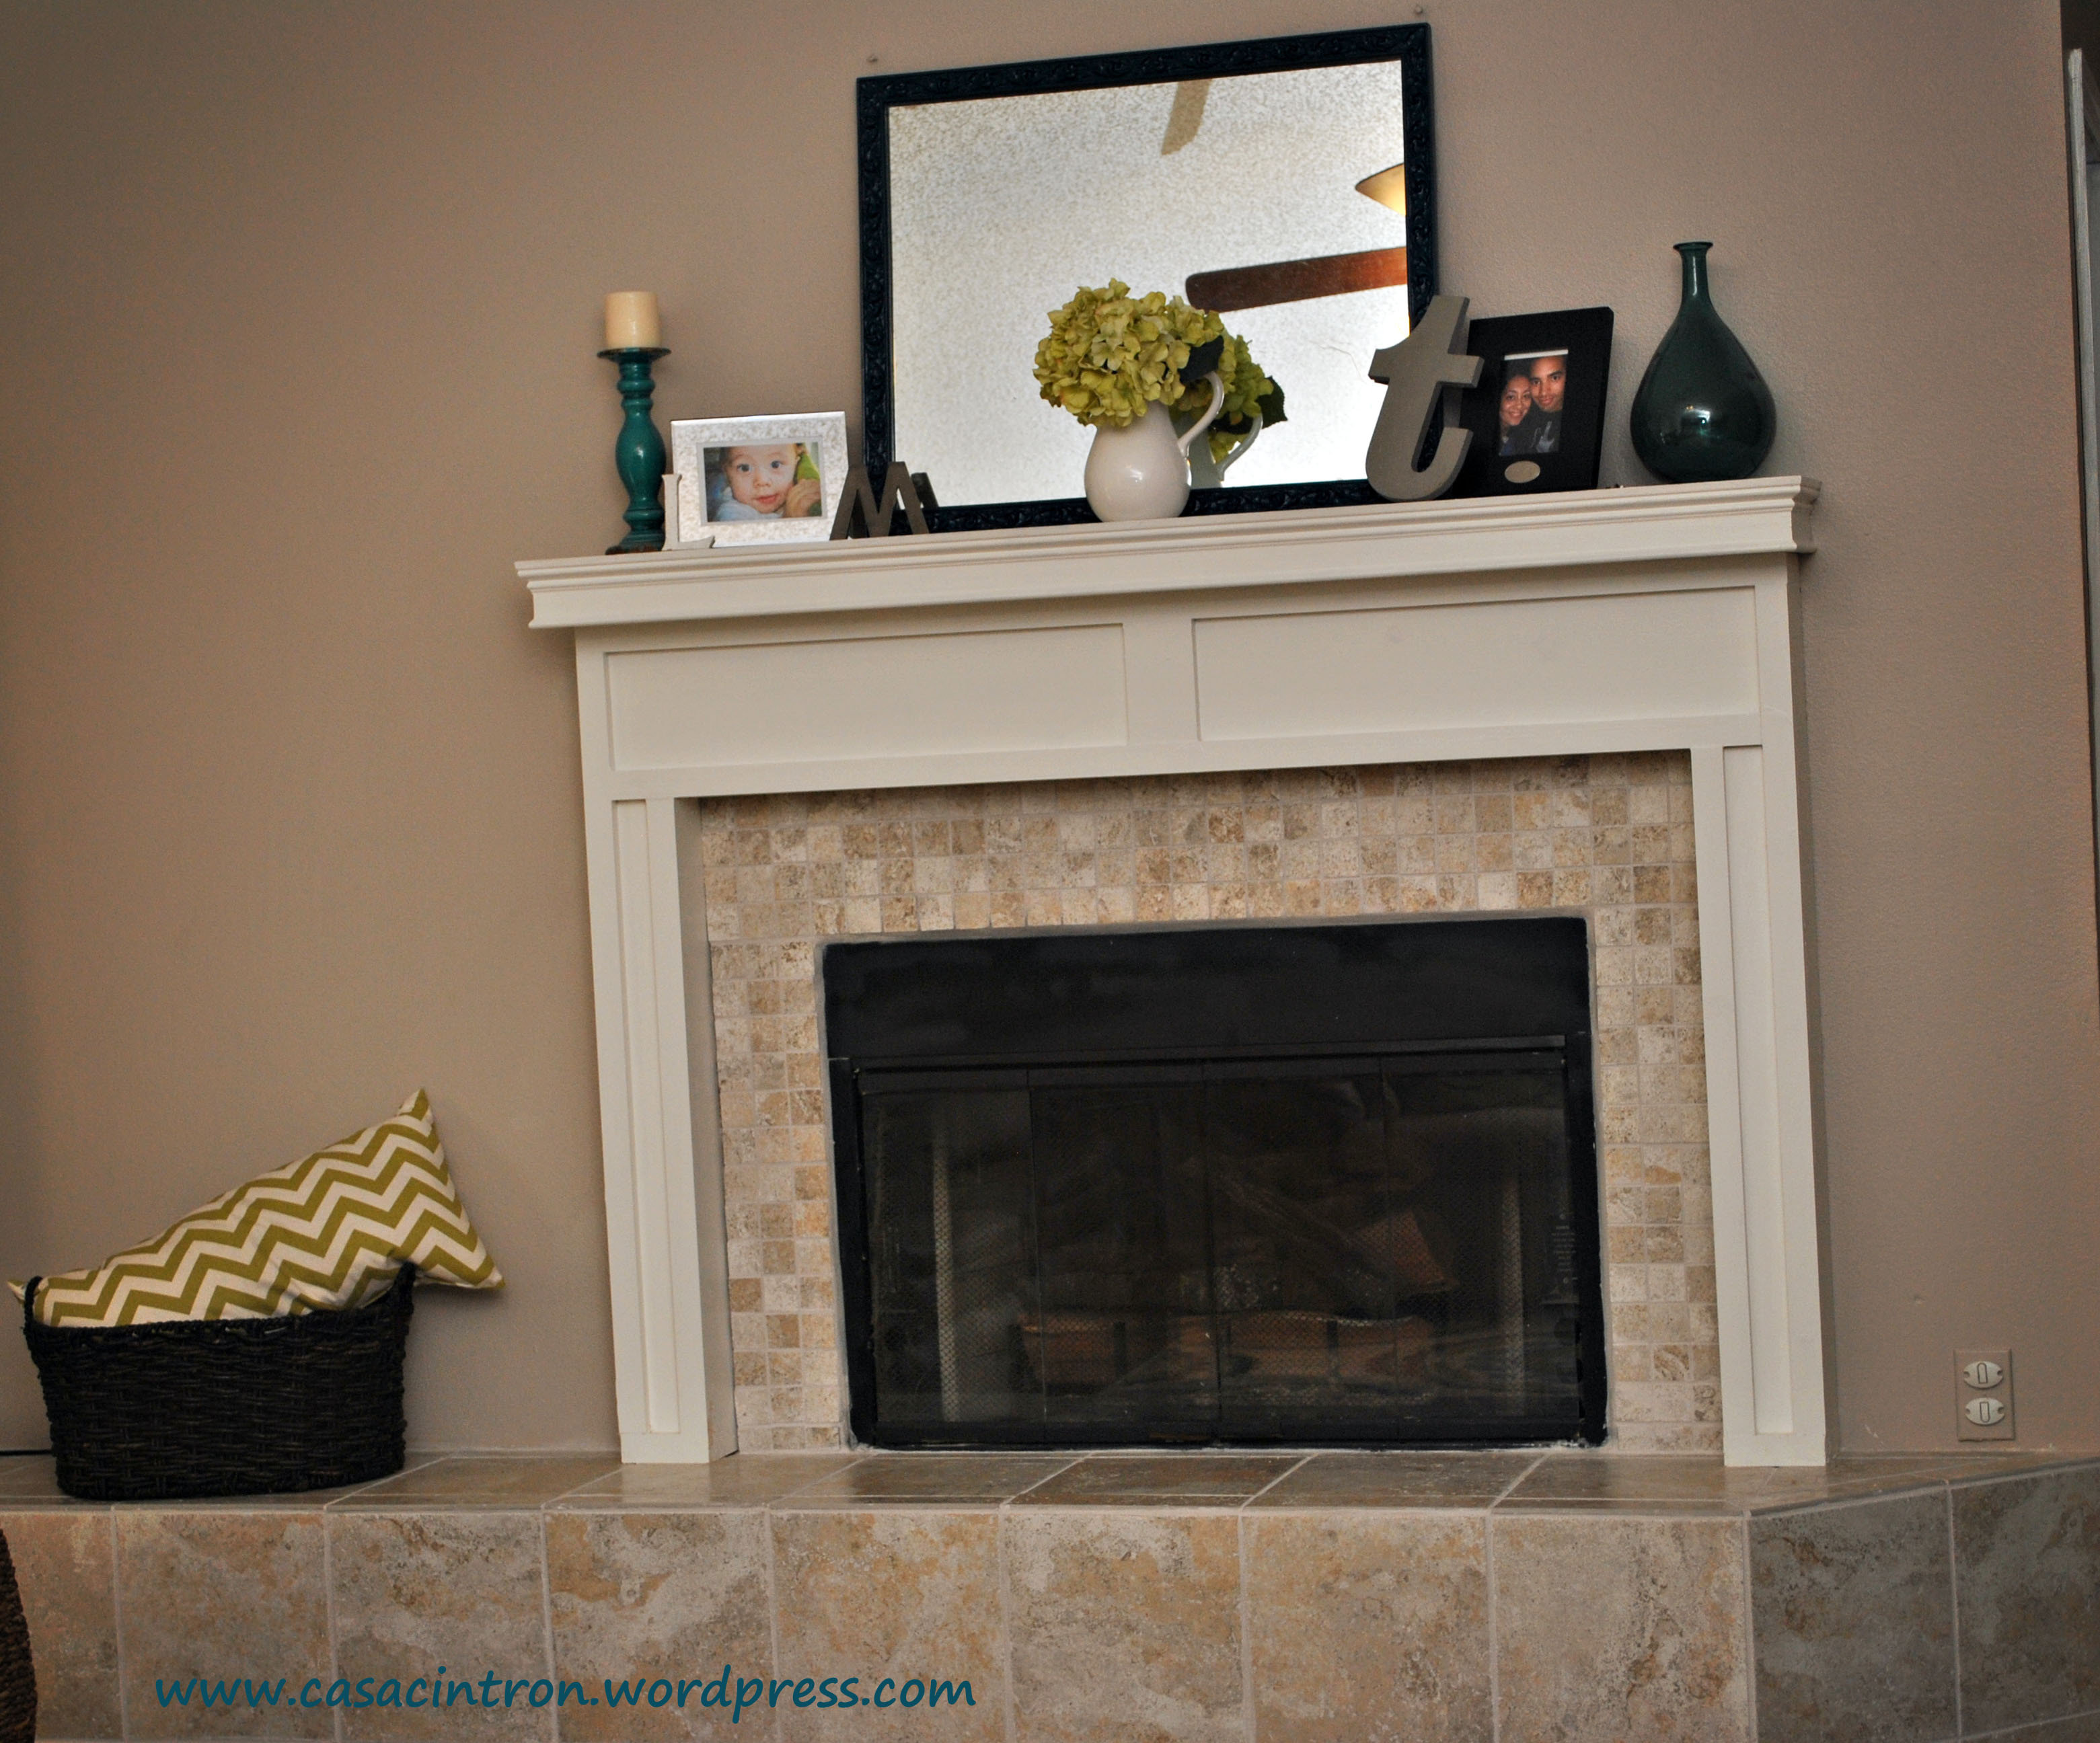 DIY Fireplace Surround
 How to build a fireplace mantle surround Phase 2